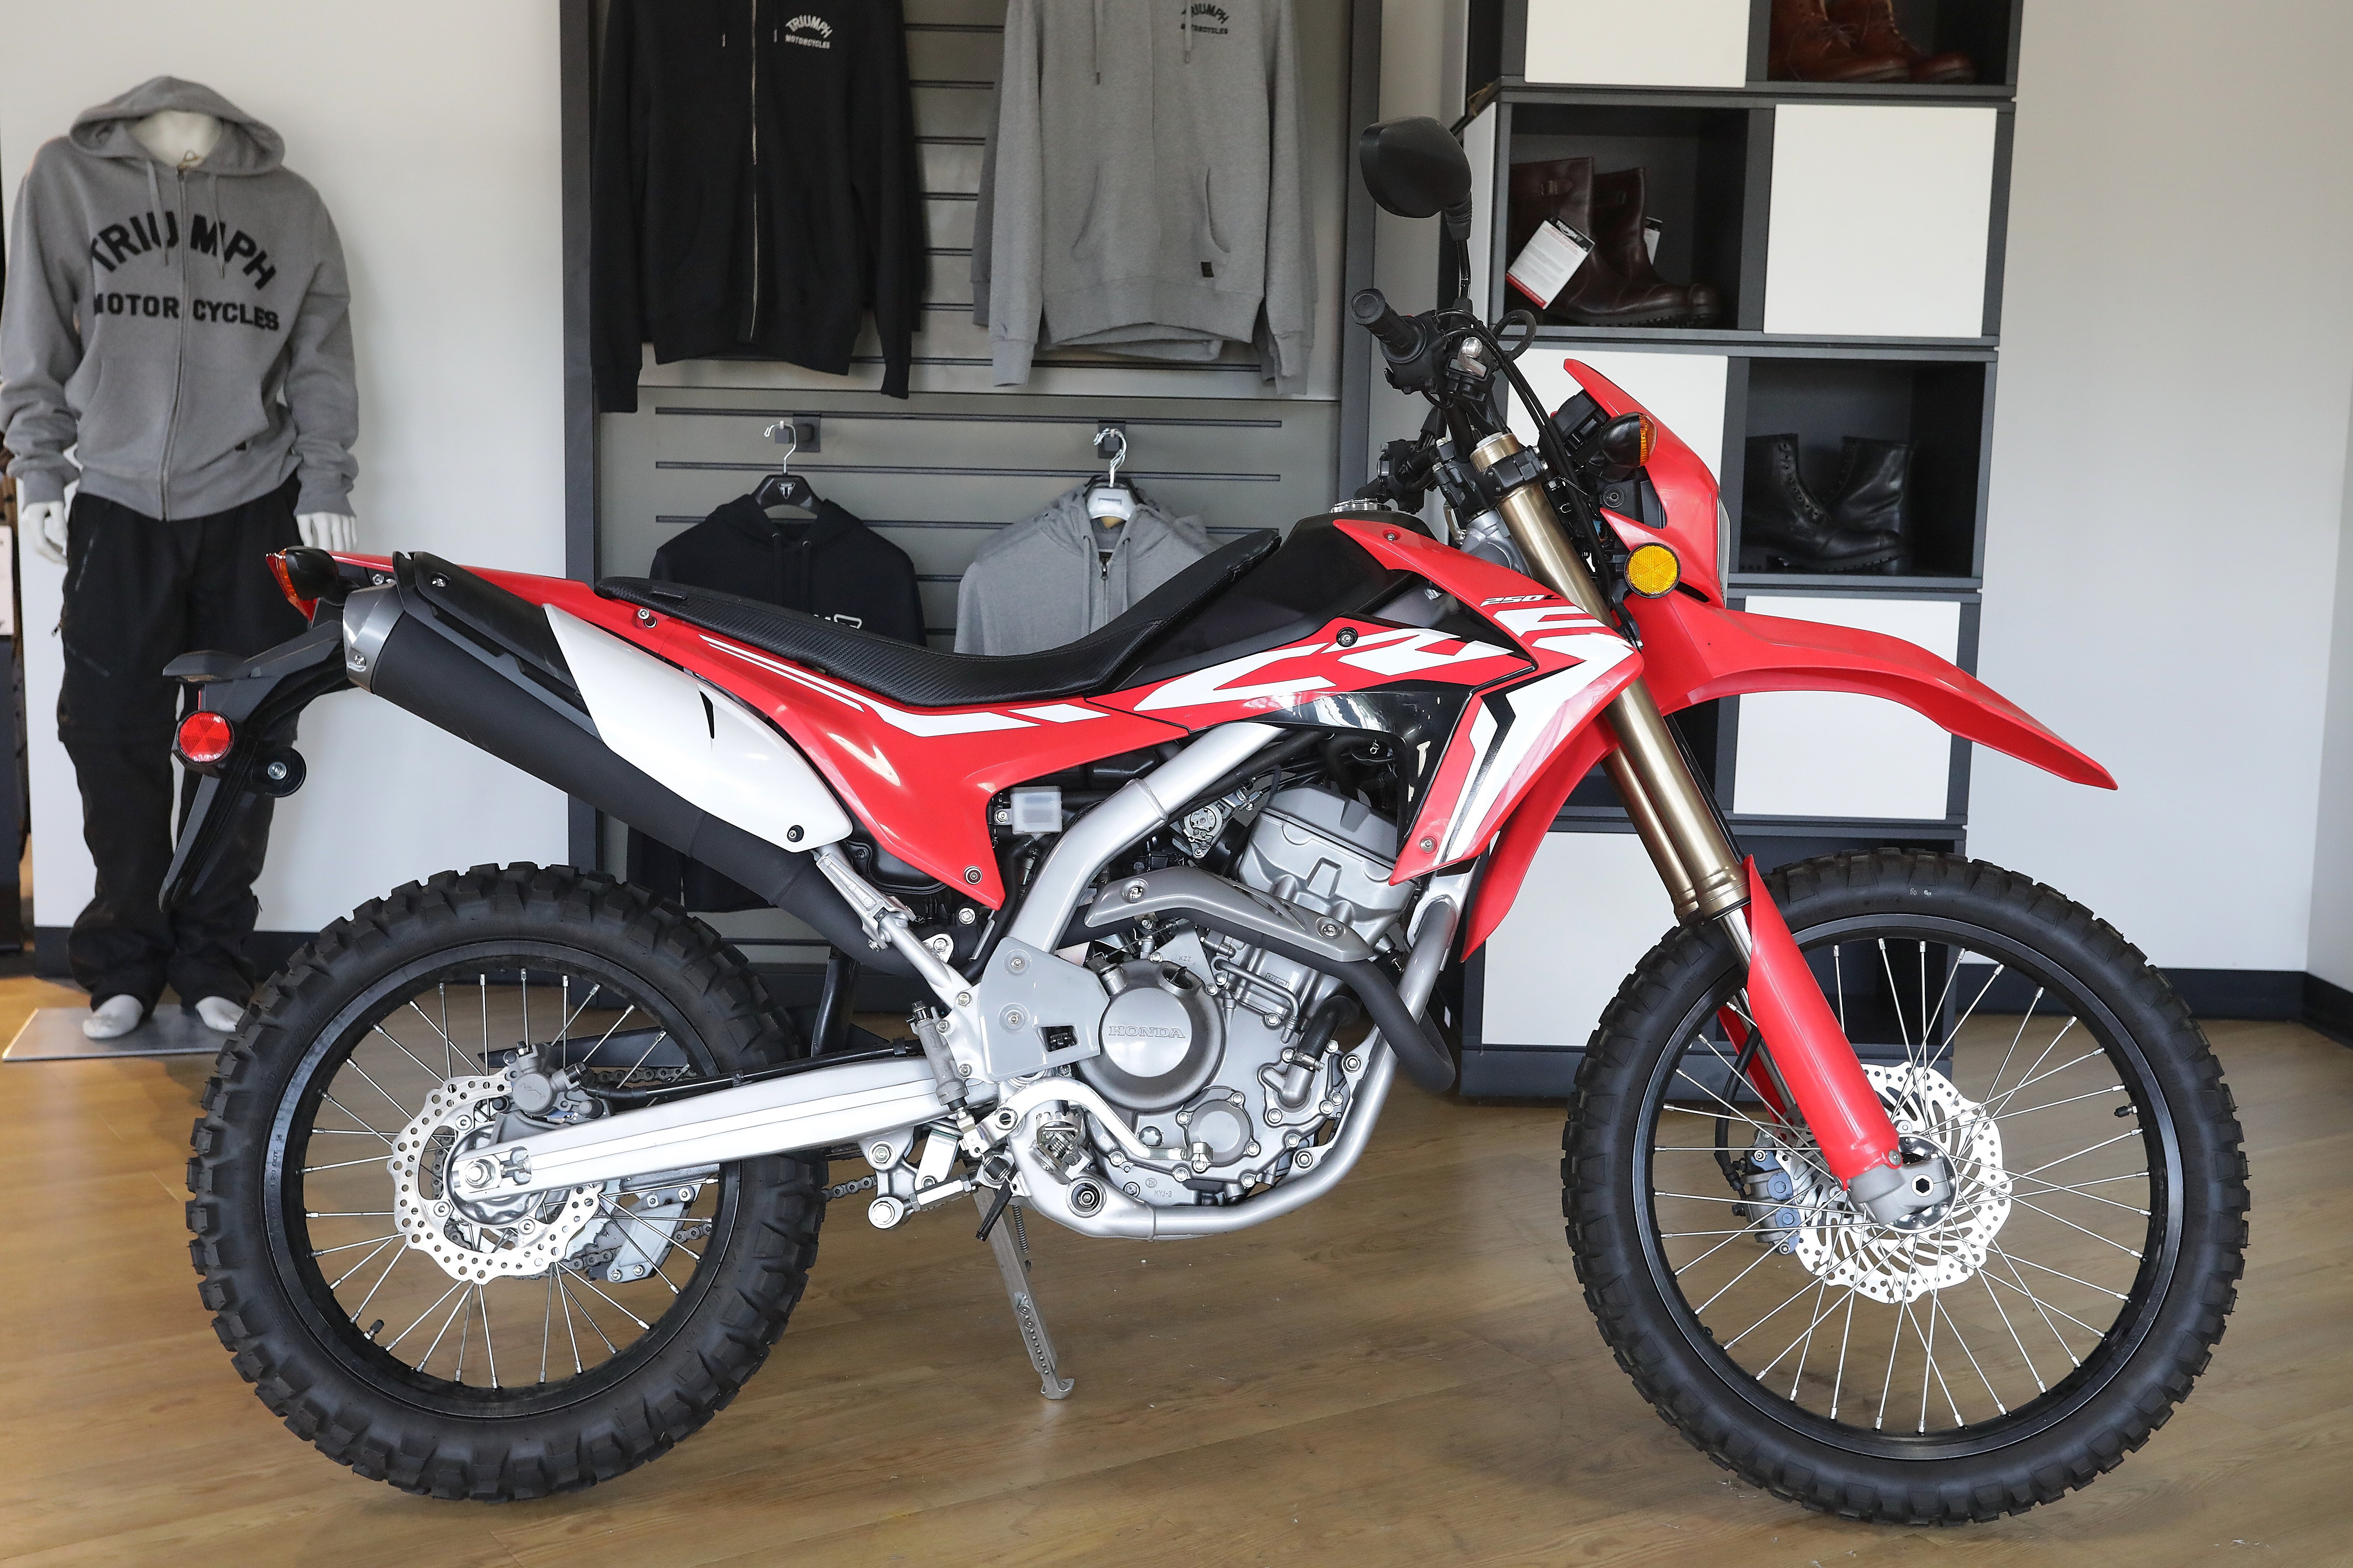 Honda CRF250L Motorcycles for Sale - Motorcycles on Autotrader